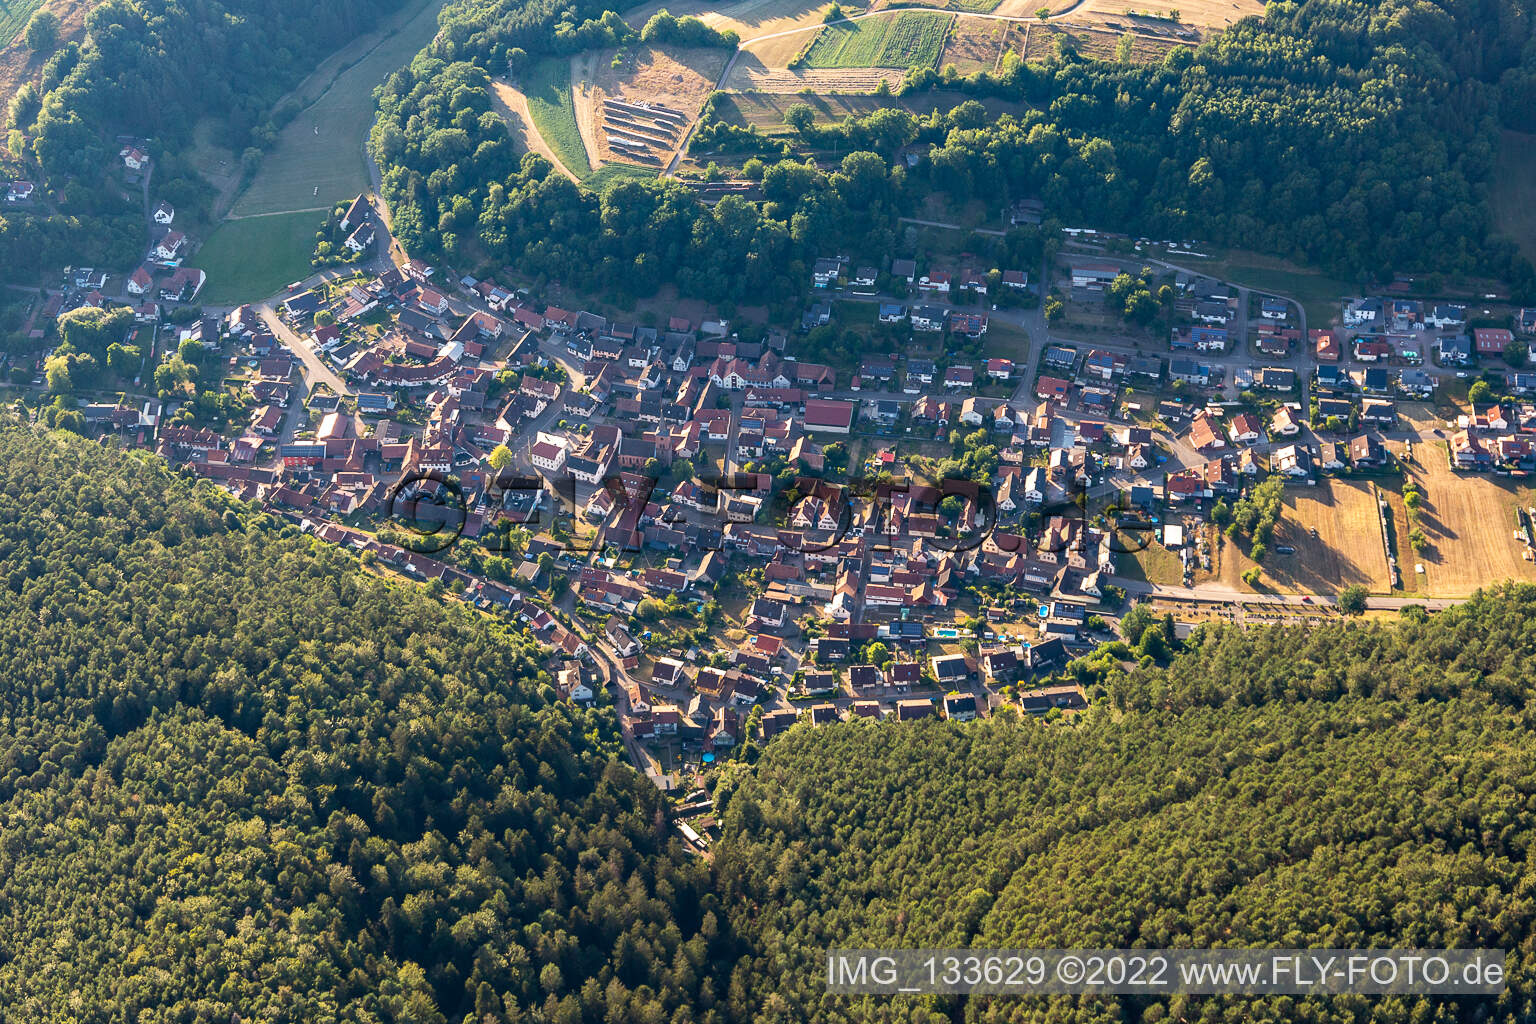 Vorderweidenthal in the state Rhineland-Palatinate, Germany seen from a drone